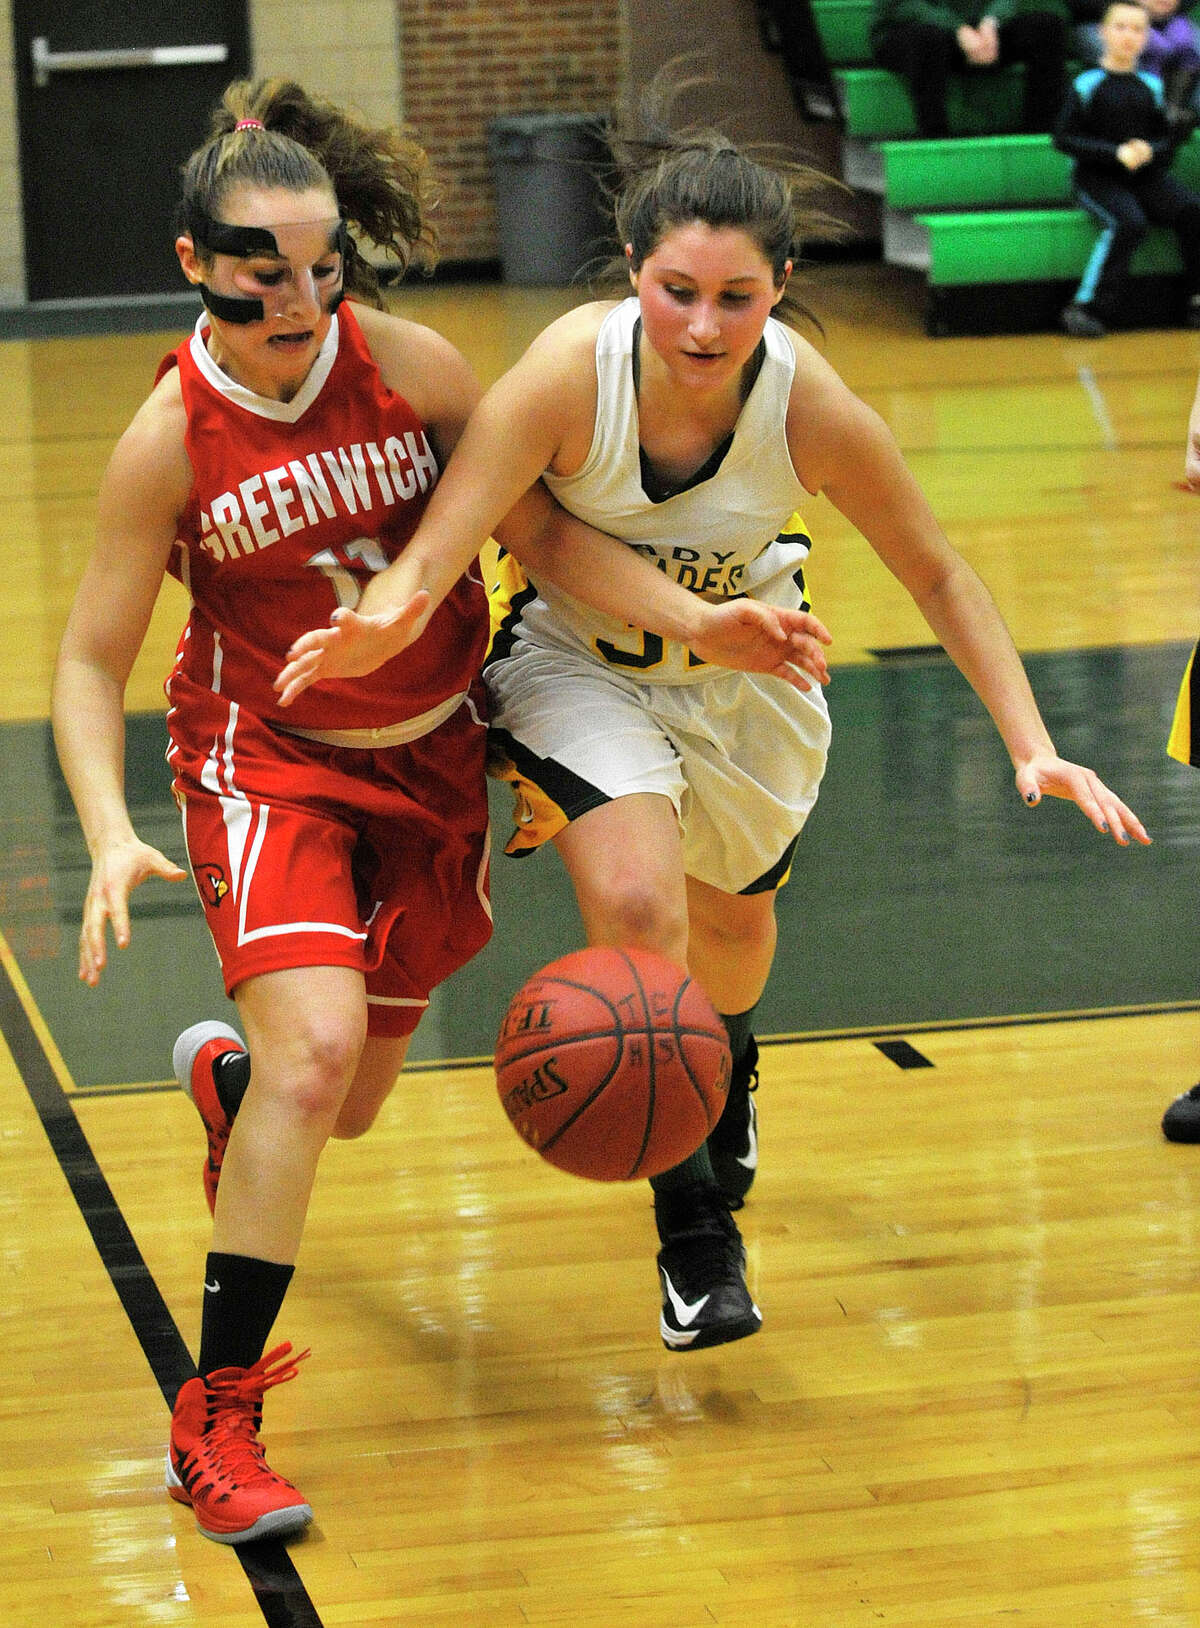 Greenwich's Alexa Moses and Trinity Catholic's Gina DeVito compete for the loose ball during their game at Trinity Catholic High School in Stamford, Conn., on Wednesday, Dec. 11, 2013. Greenwich won, 68-32.